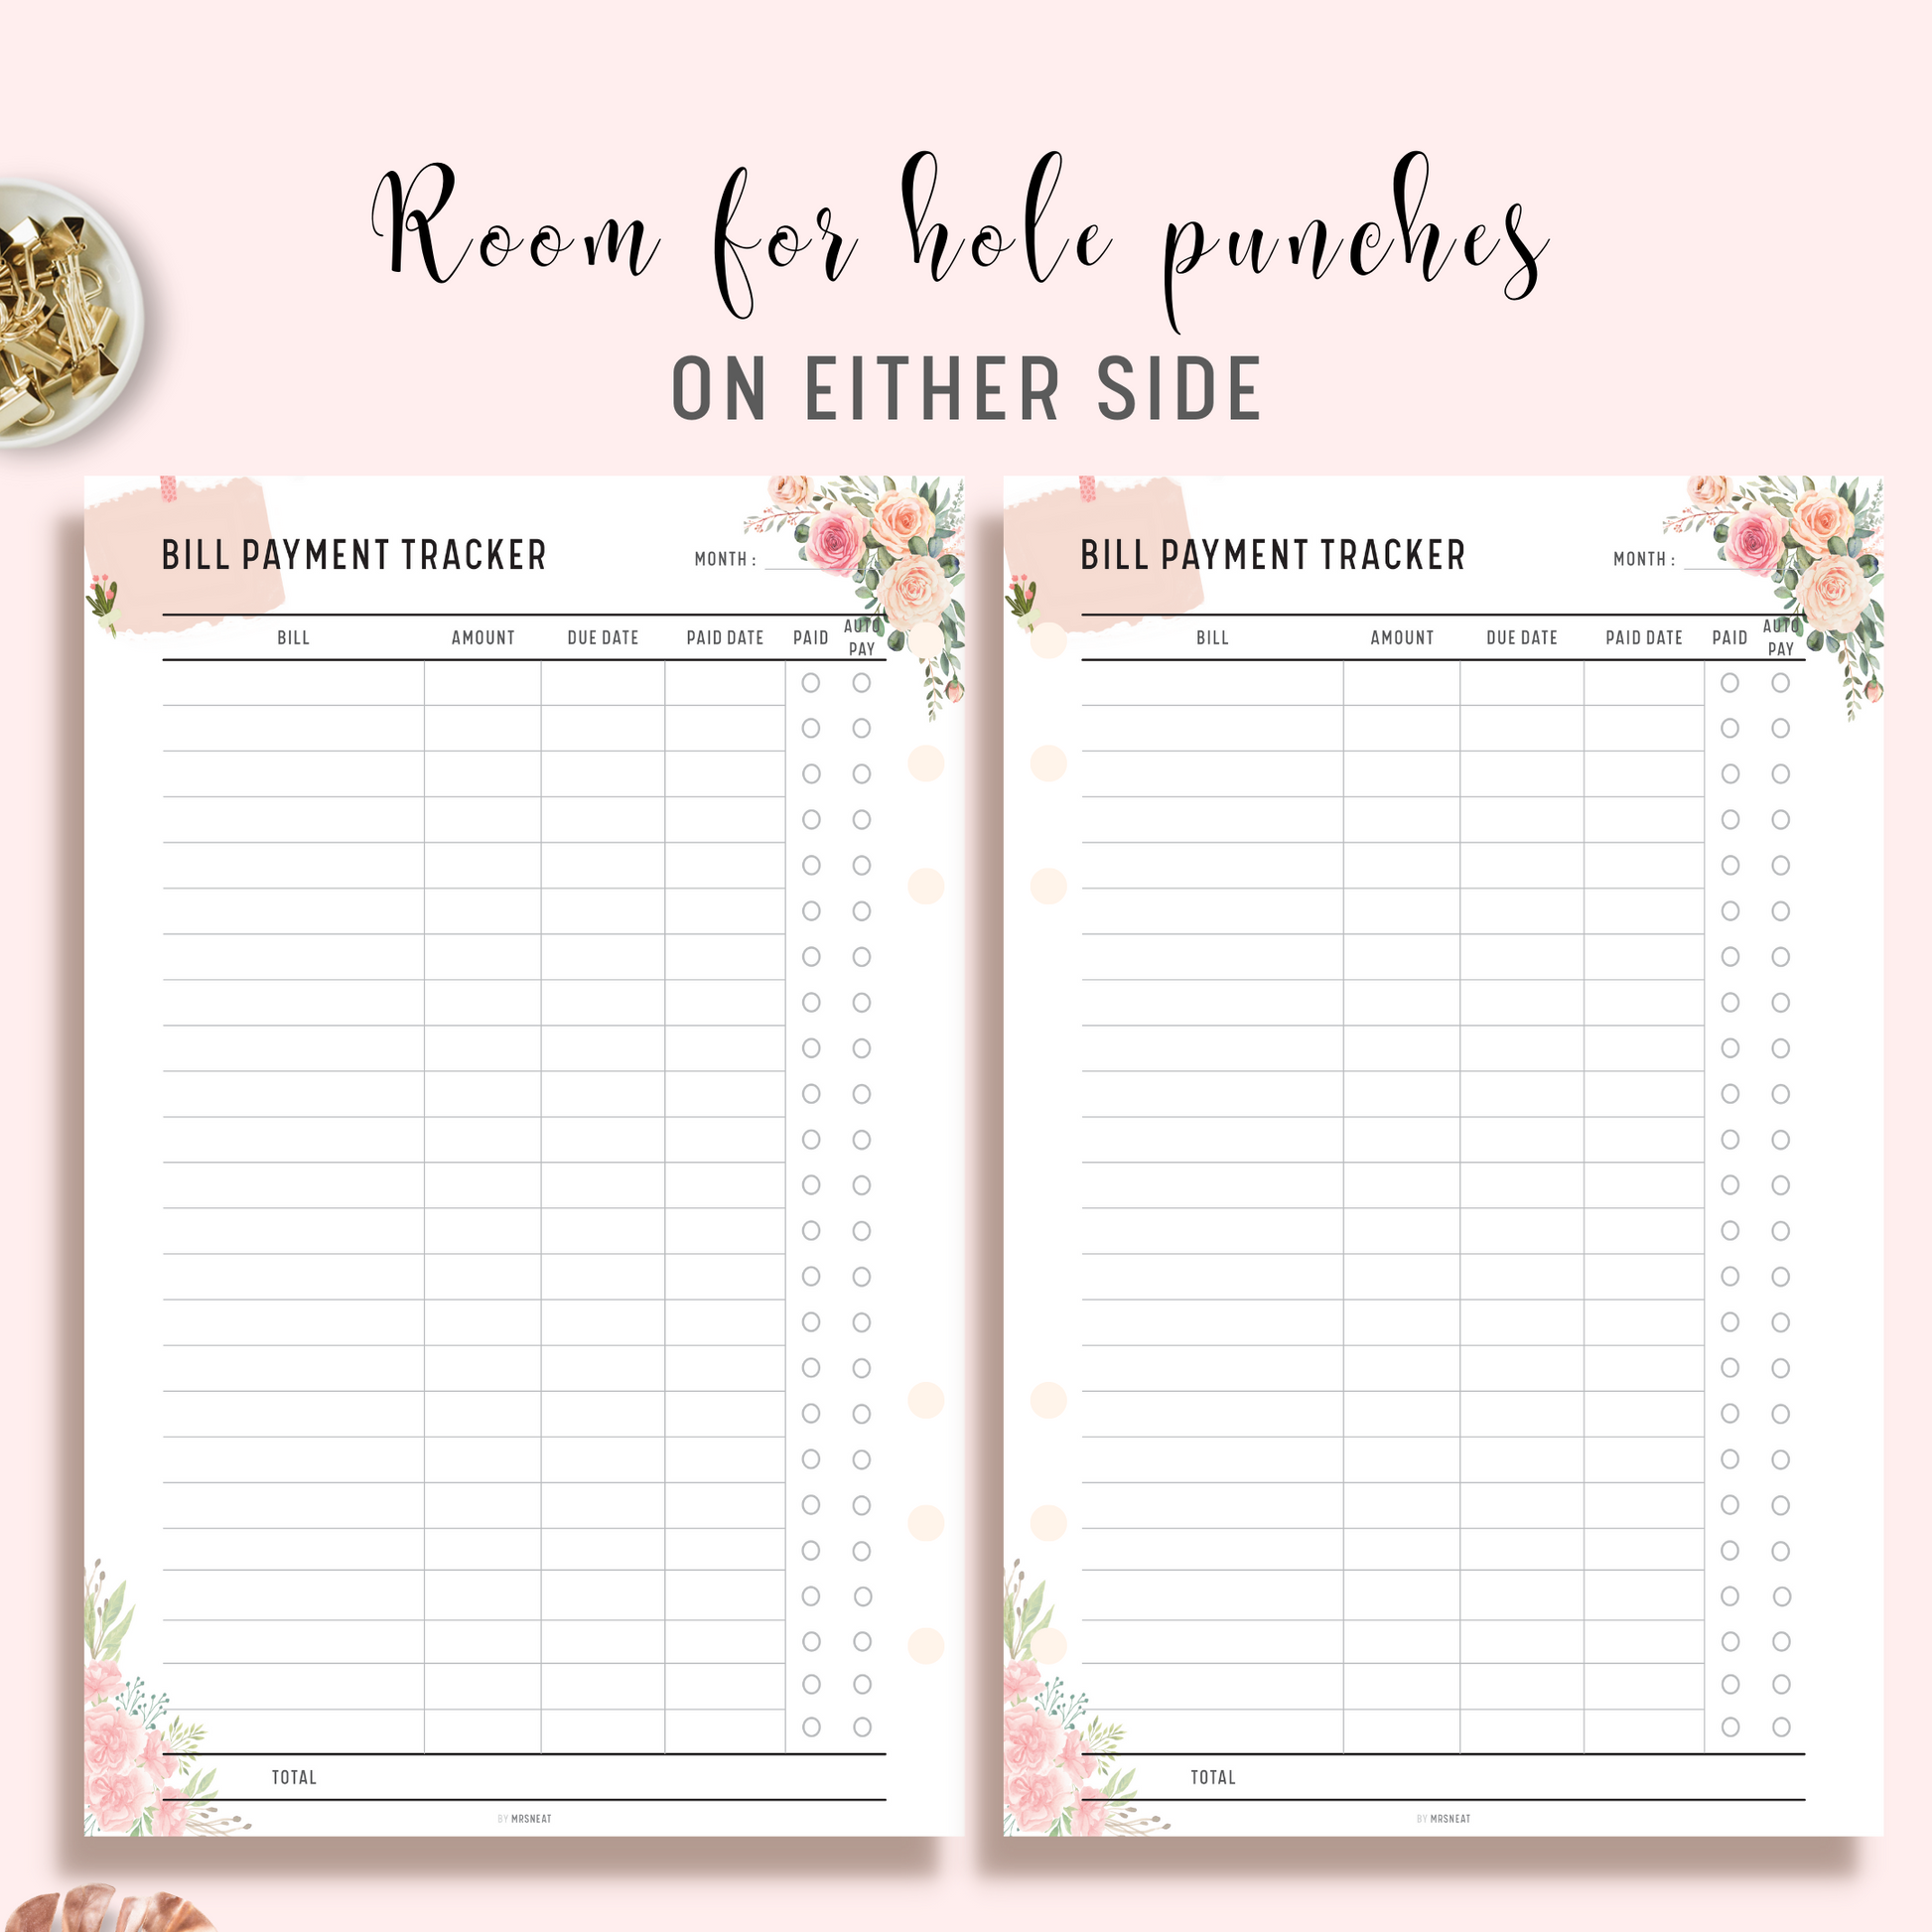 Floral Bill Payment Tracker Planner Printable with room for hole punches on either side